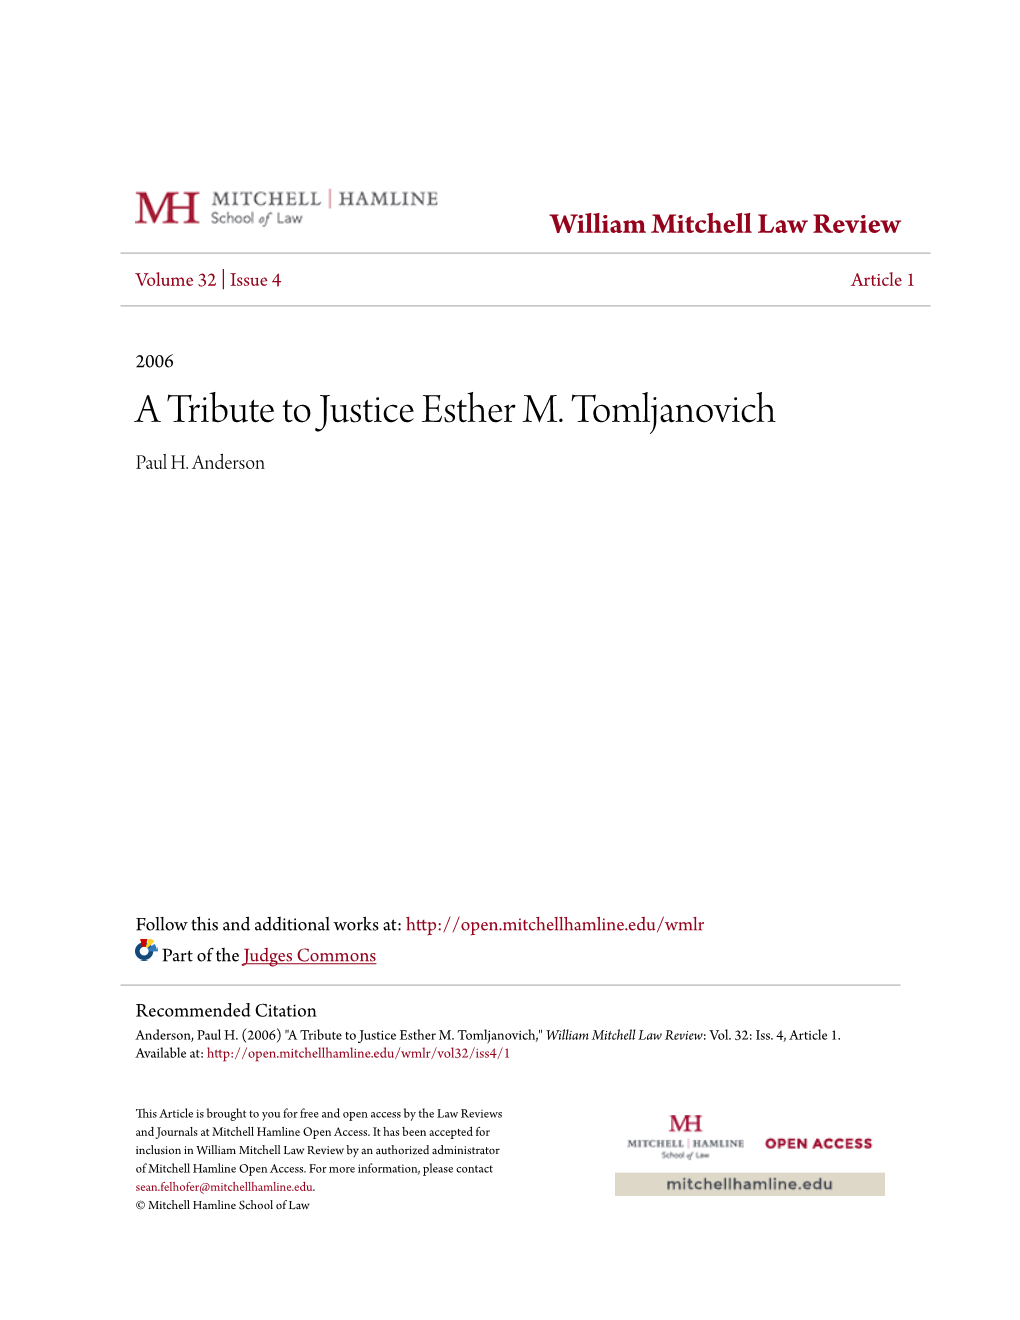 A Tribute to Justice Esther M. Tomljanovich Paul H